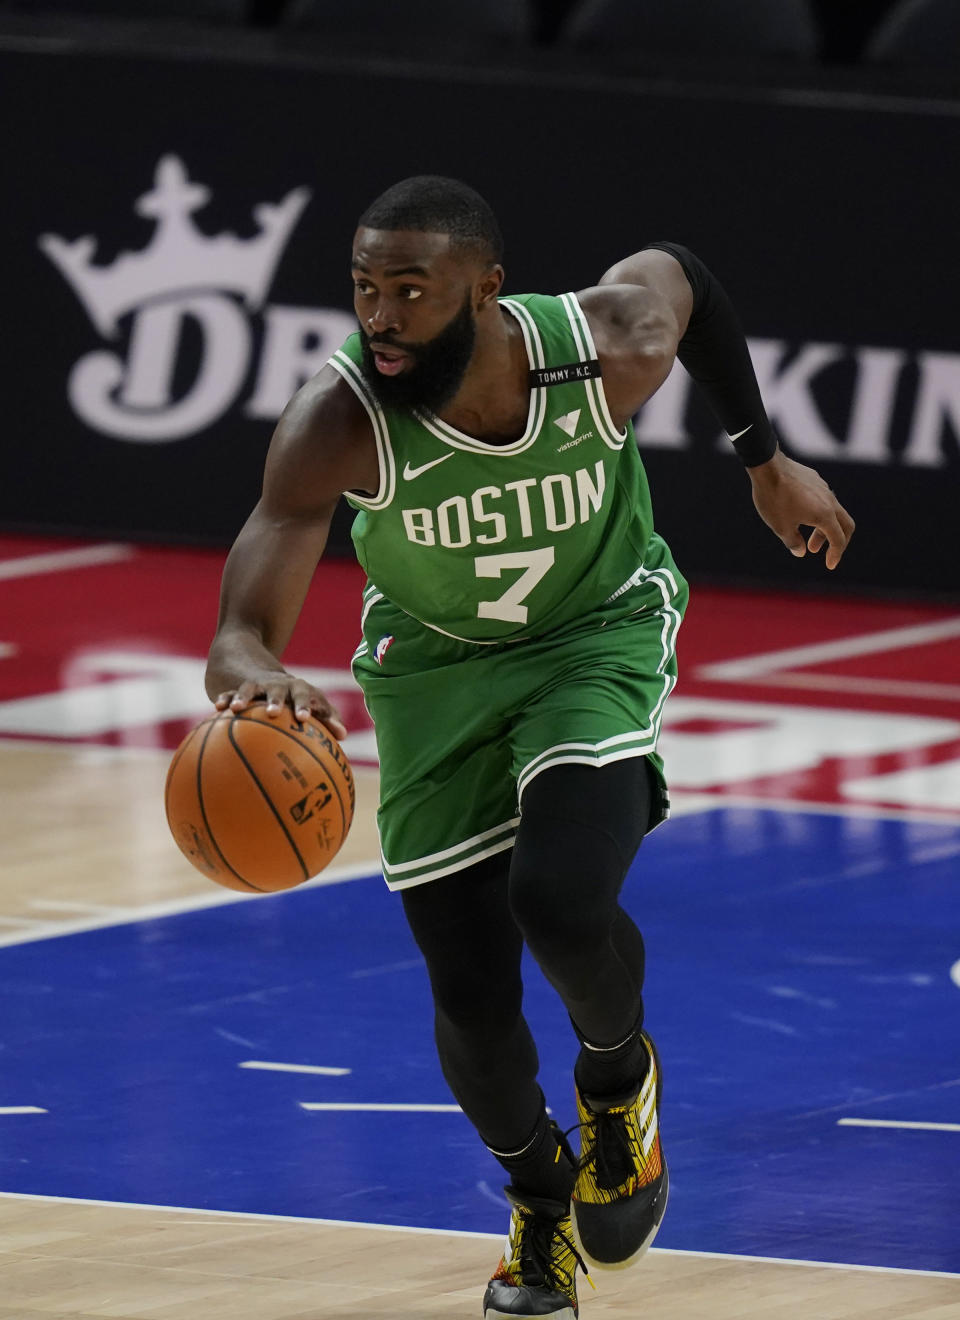 Boston Celtics guard Jaylen Brown brings the ball up during the first half of the team's NBA basketball game agains the Detroit Pistons, Friday, Jan. 1, 2021, in Detroit. (AP Photo/Carlos Osorio)